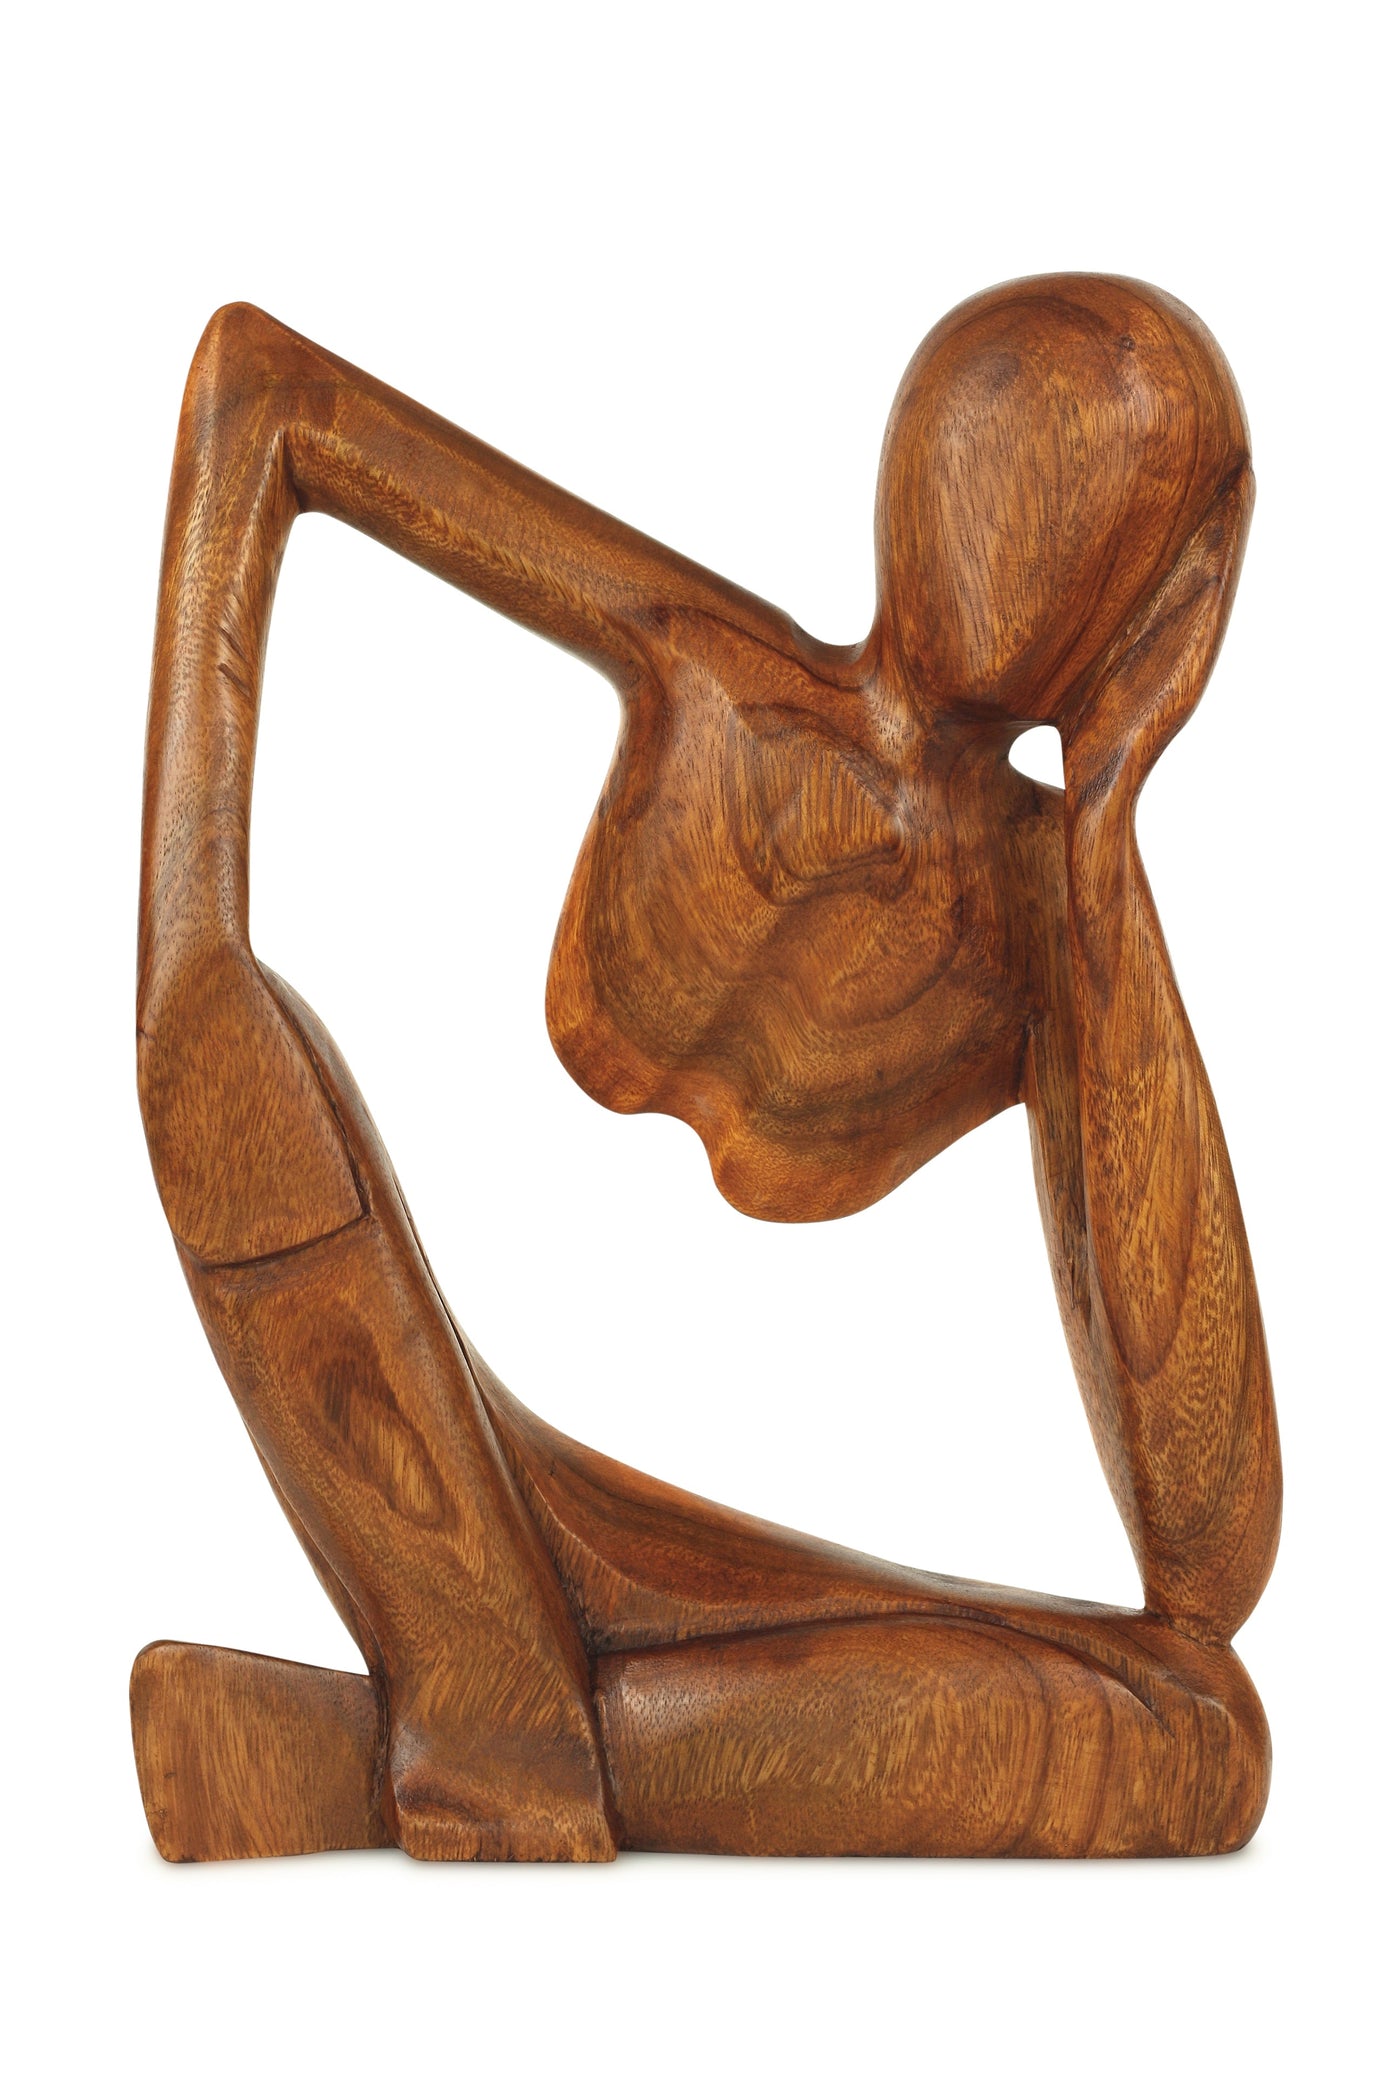 12" Wooden Abstract Sculpture Handmade Handcrafted Art "Thinking Man 2" Home Decor Decorative Figurine Accent Decoration Hand Carved Thinker Statue